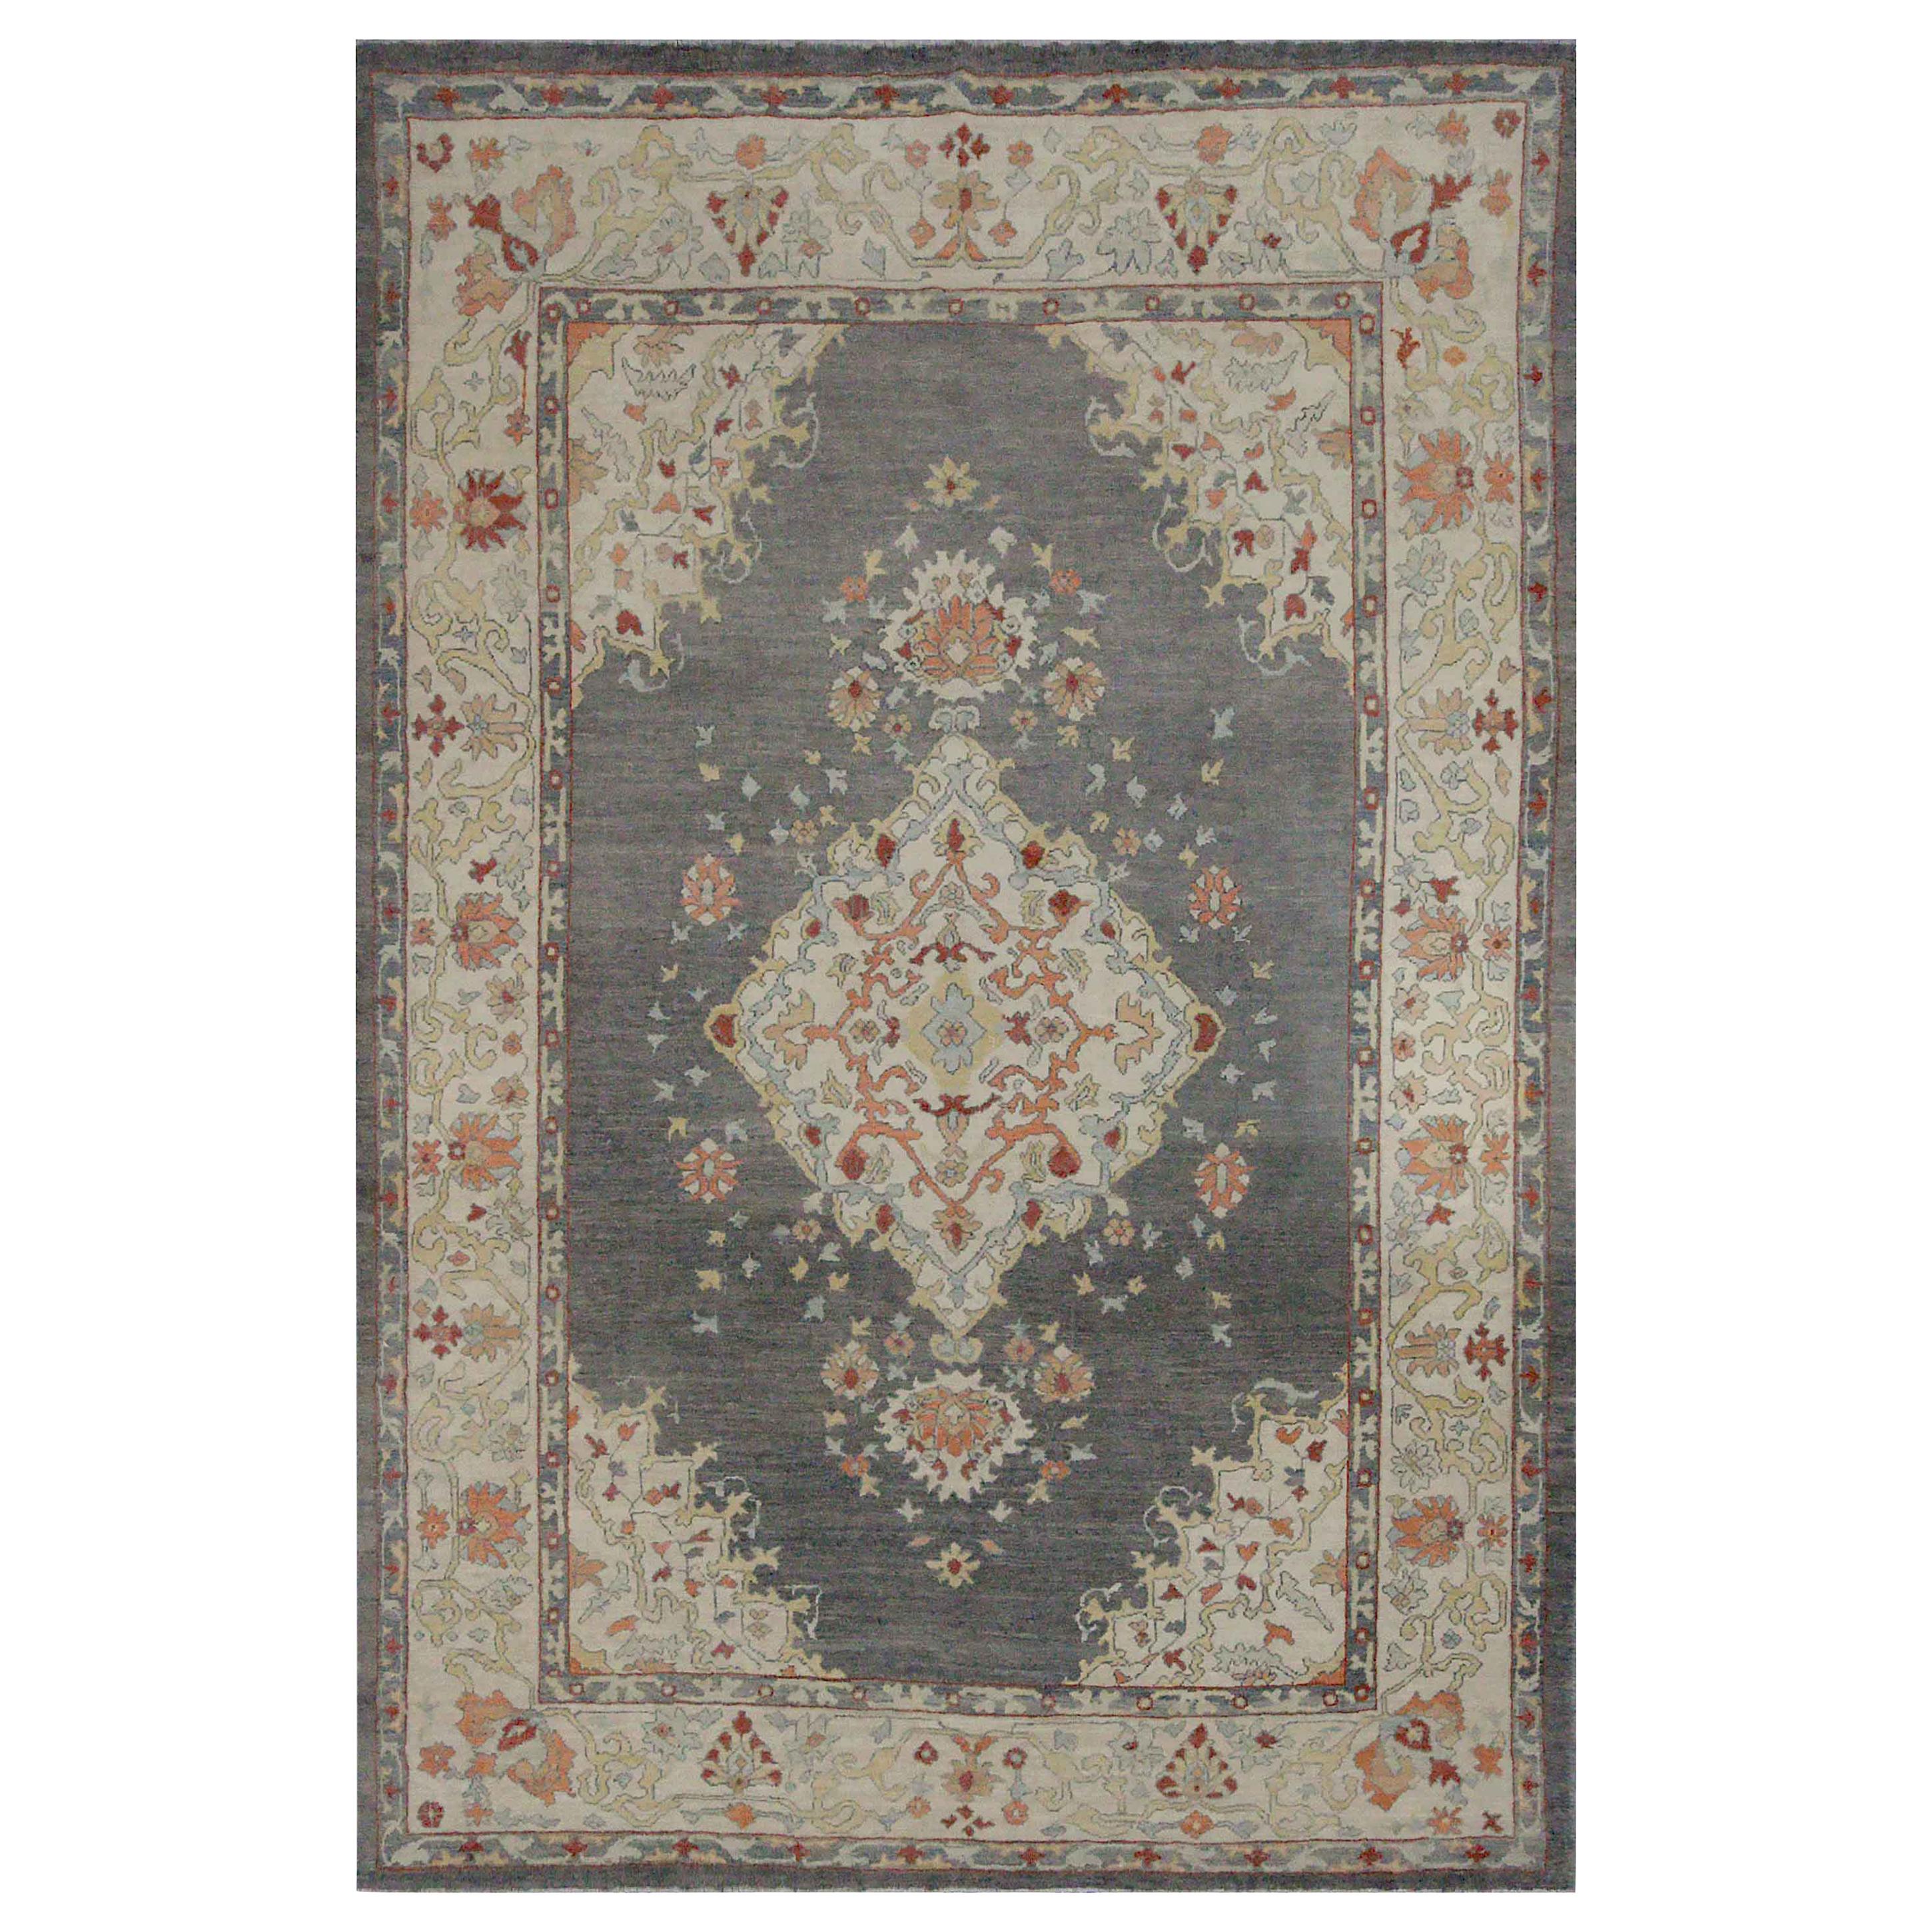 New Turkish Oushak Rug with Blue and Pink Floral Details on Gray Field